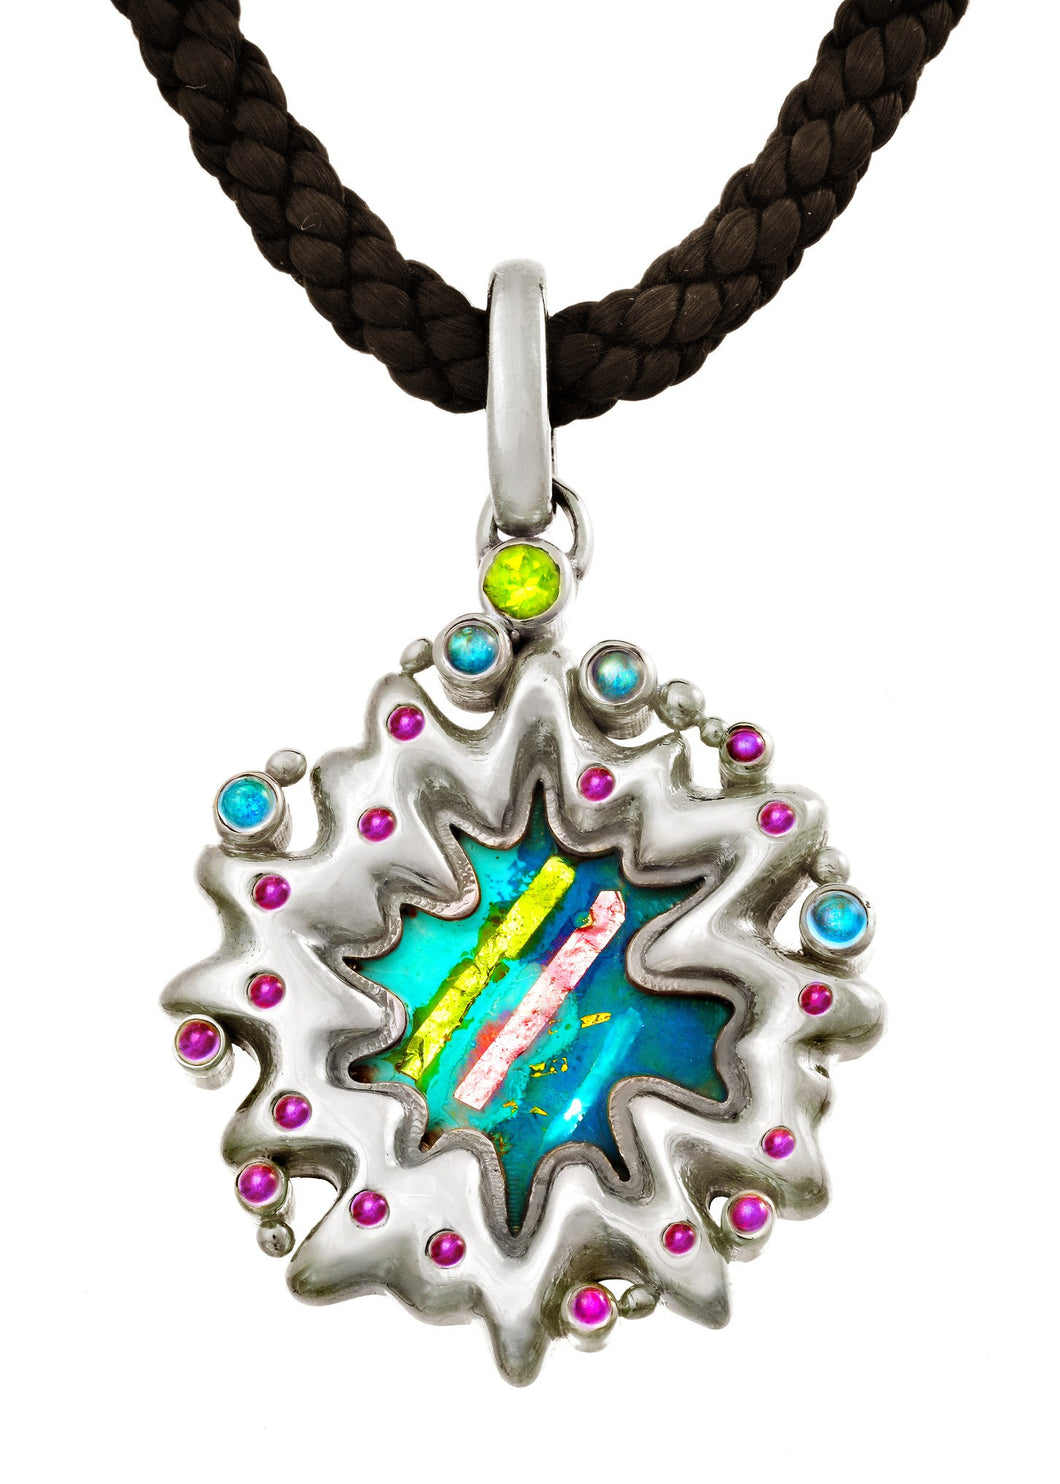 Sterling Silver Enameled Pendant accented with Amethyst, Blue Topaz, and Peridot